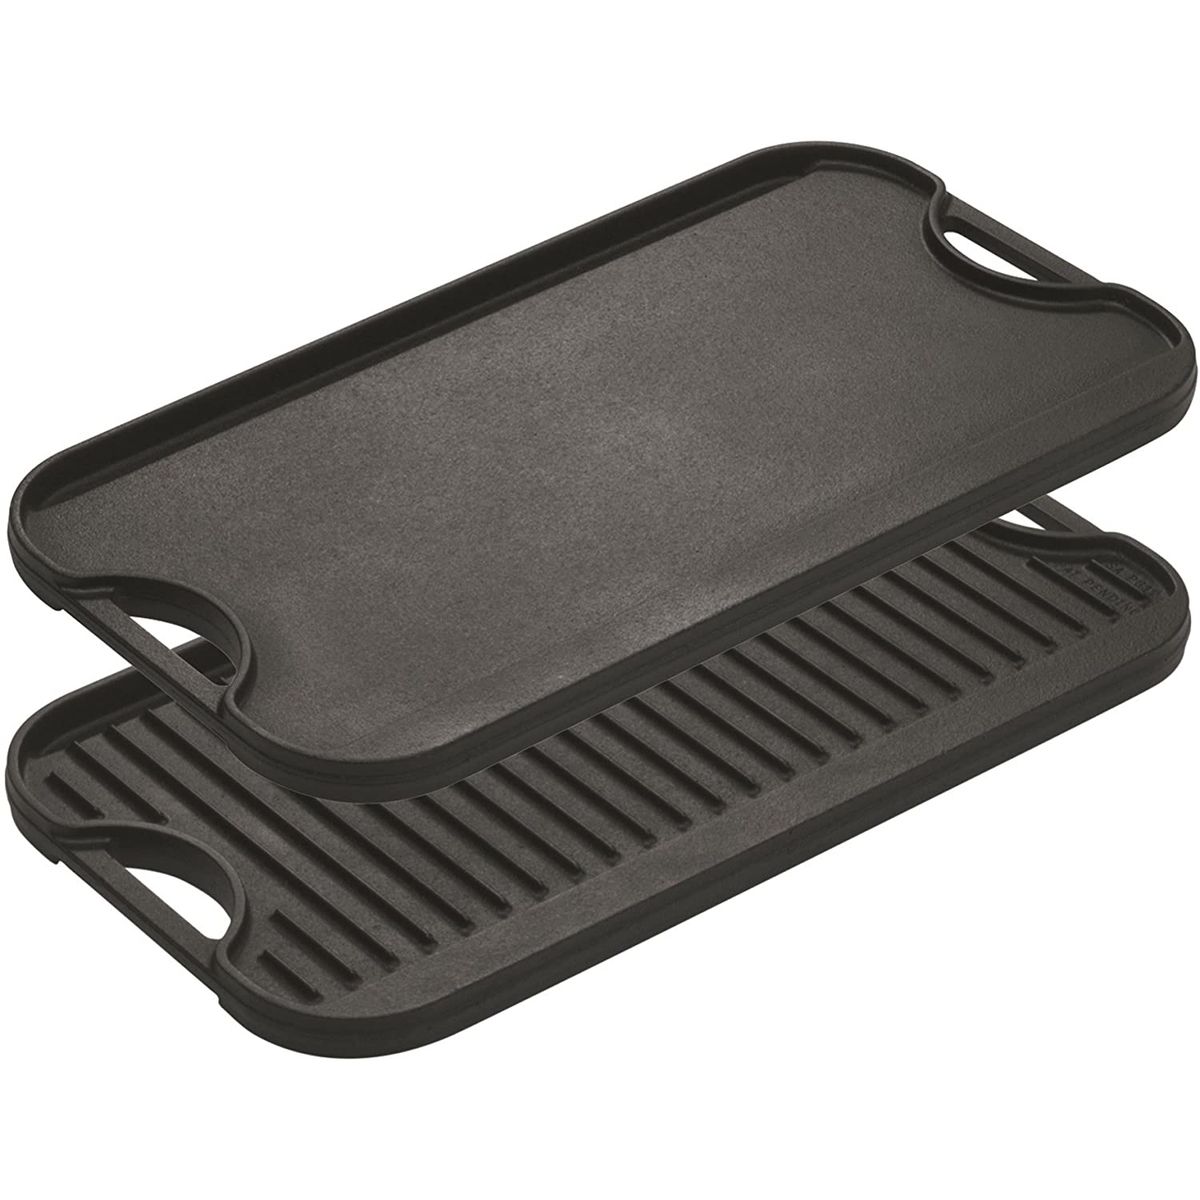 grill pans